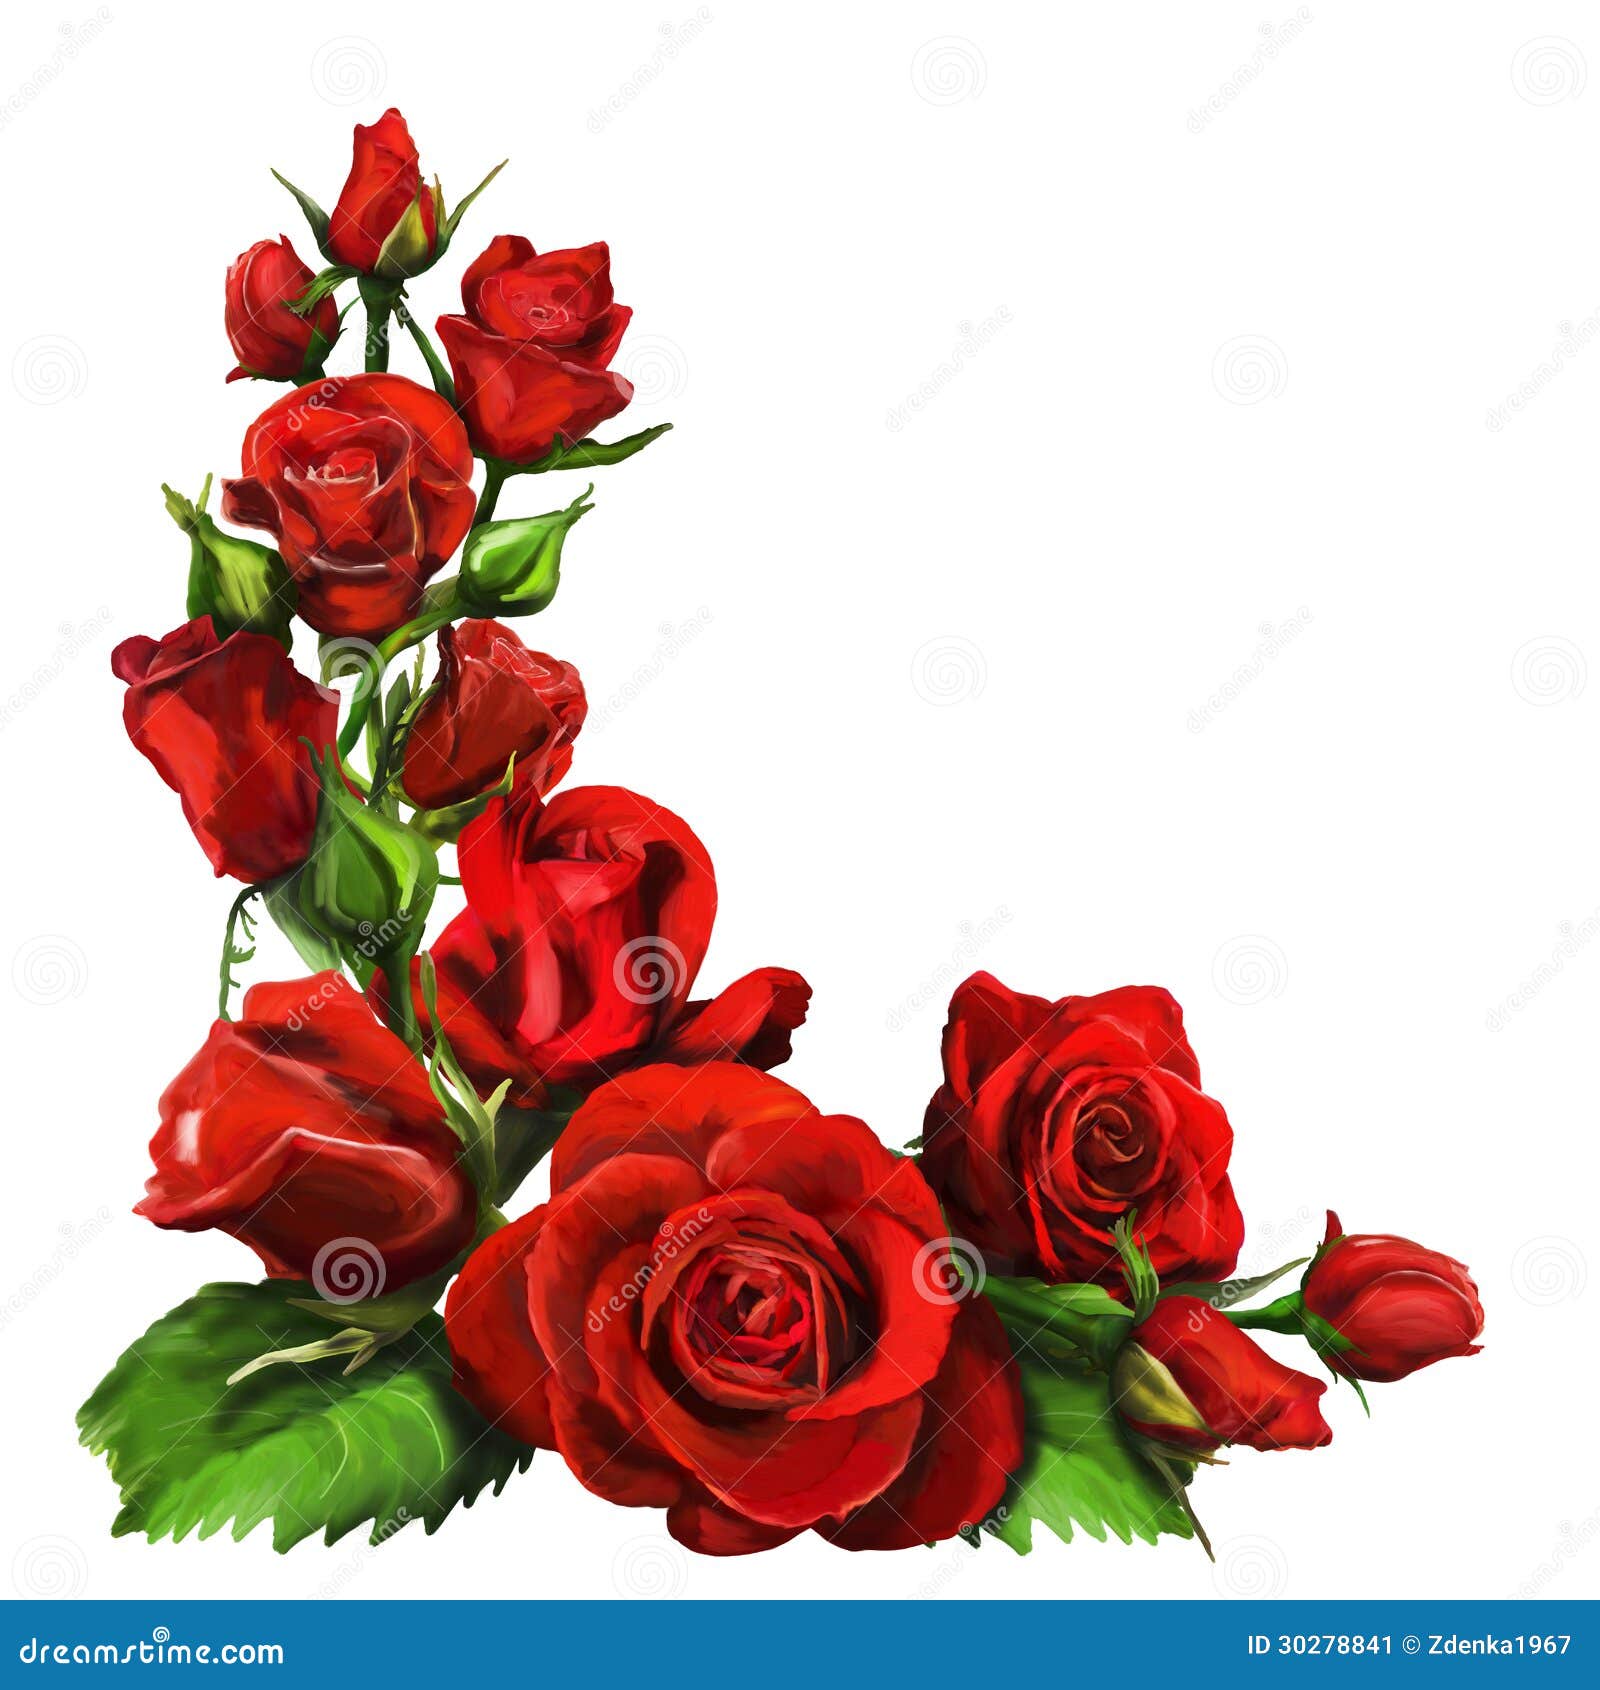 clipart rote rose - photo #16